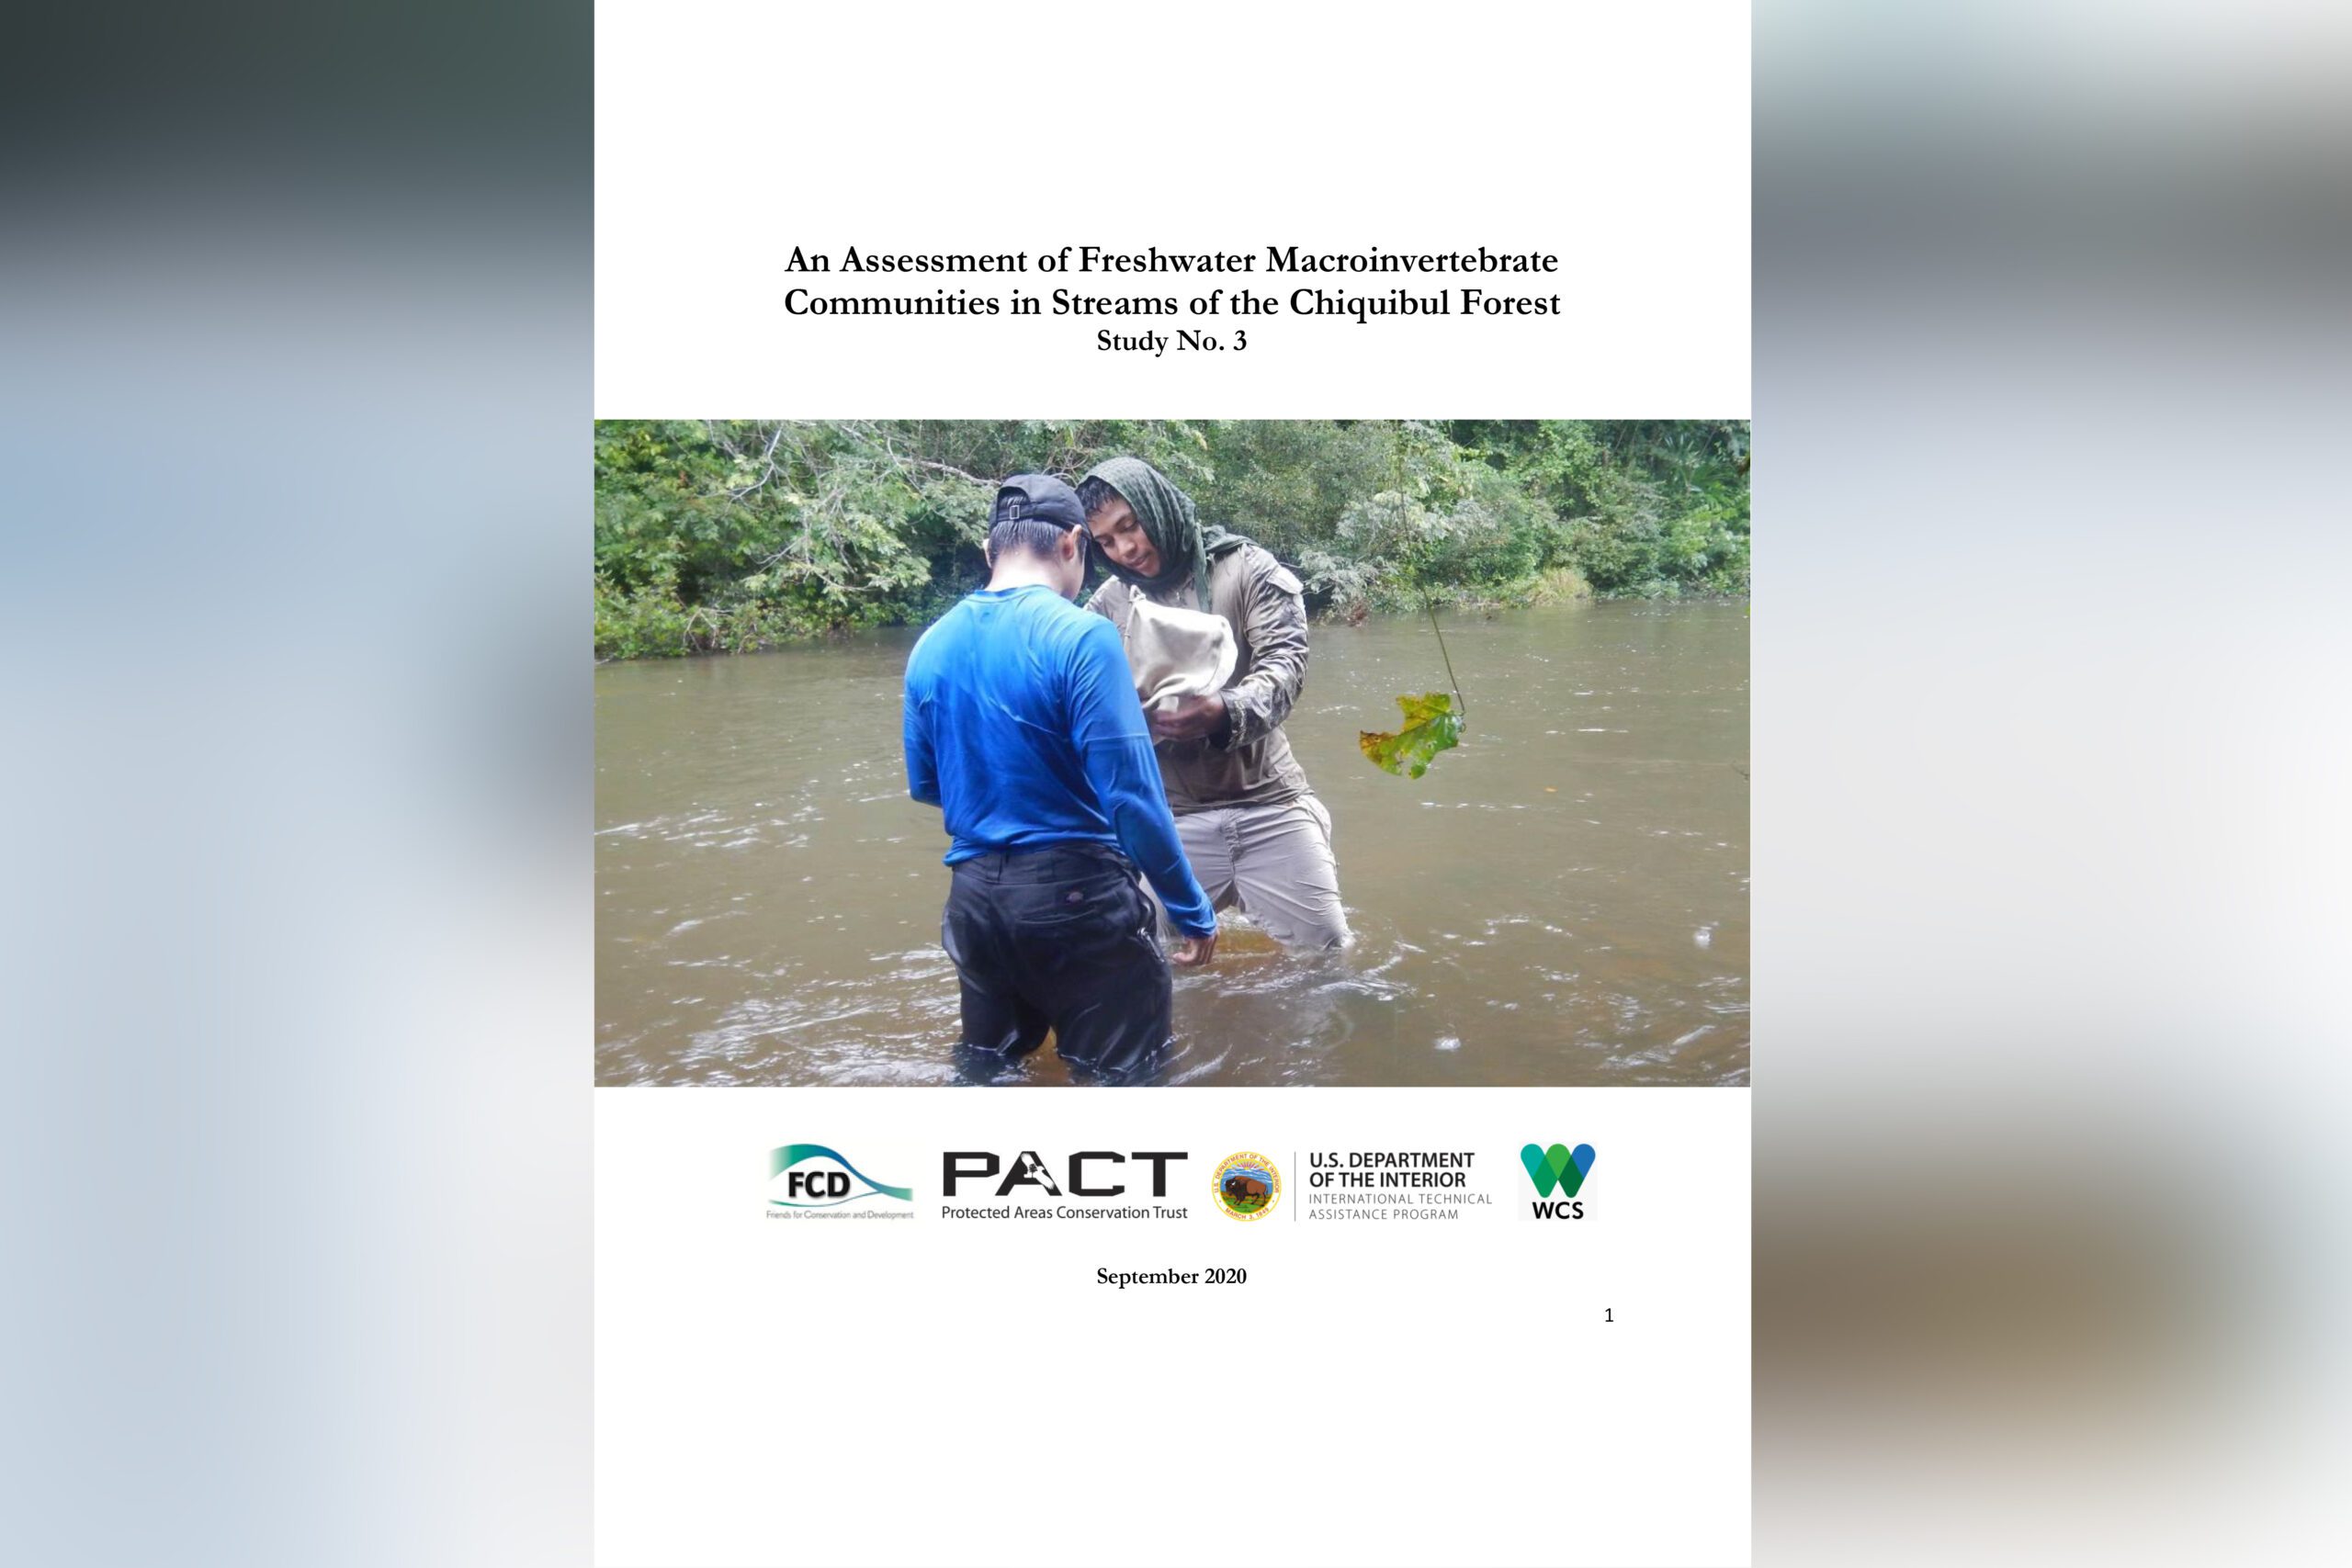 An Assessment of Freshwater Macroinvertebrate Communities in Streams of the Chiquibul ForestStudy No. 3